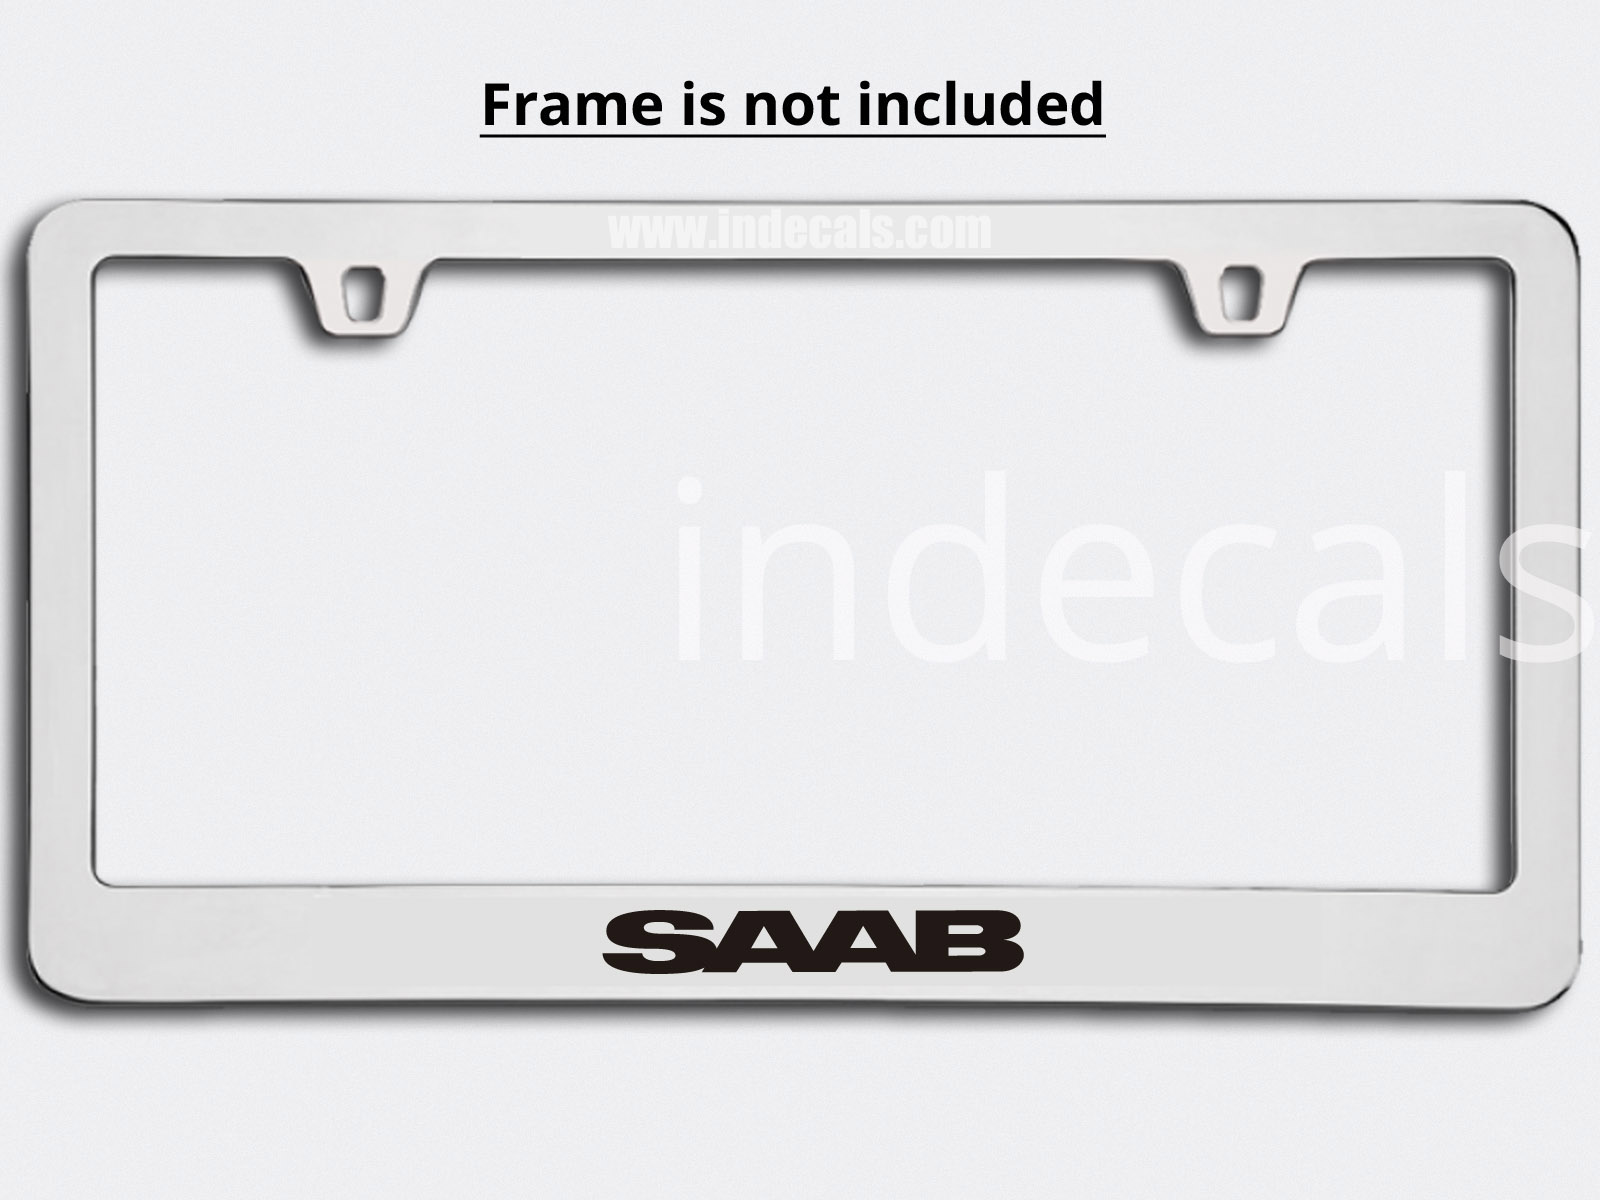 3 x Saab Stickers for Plate Frame - Black